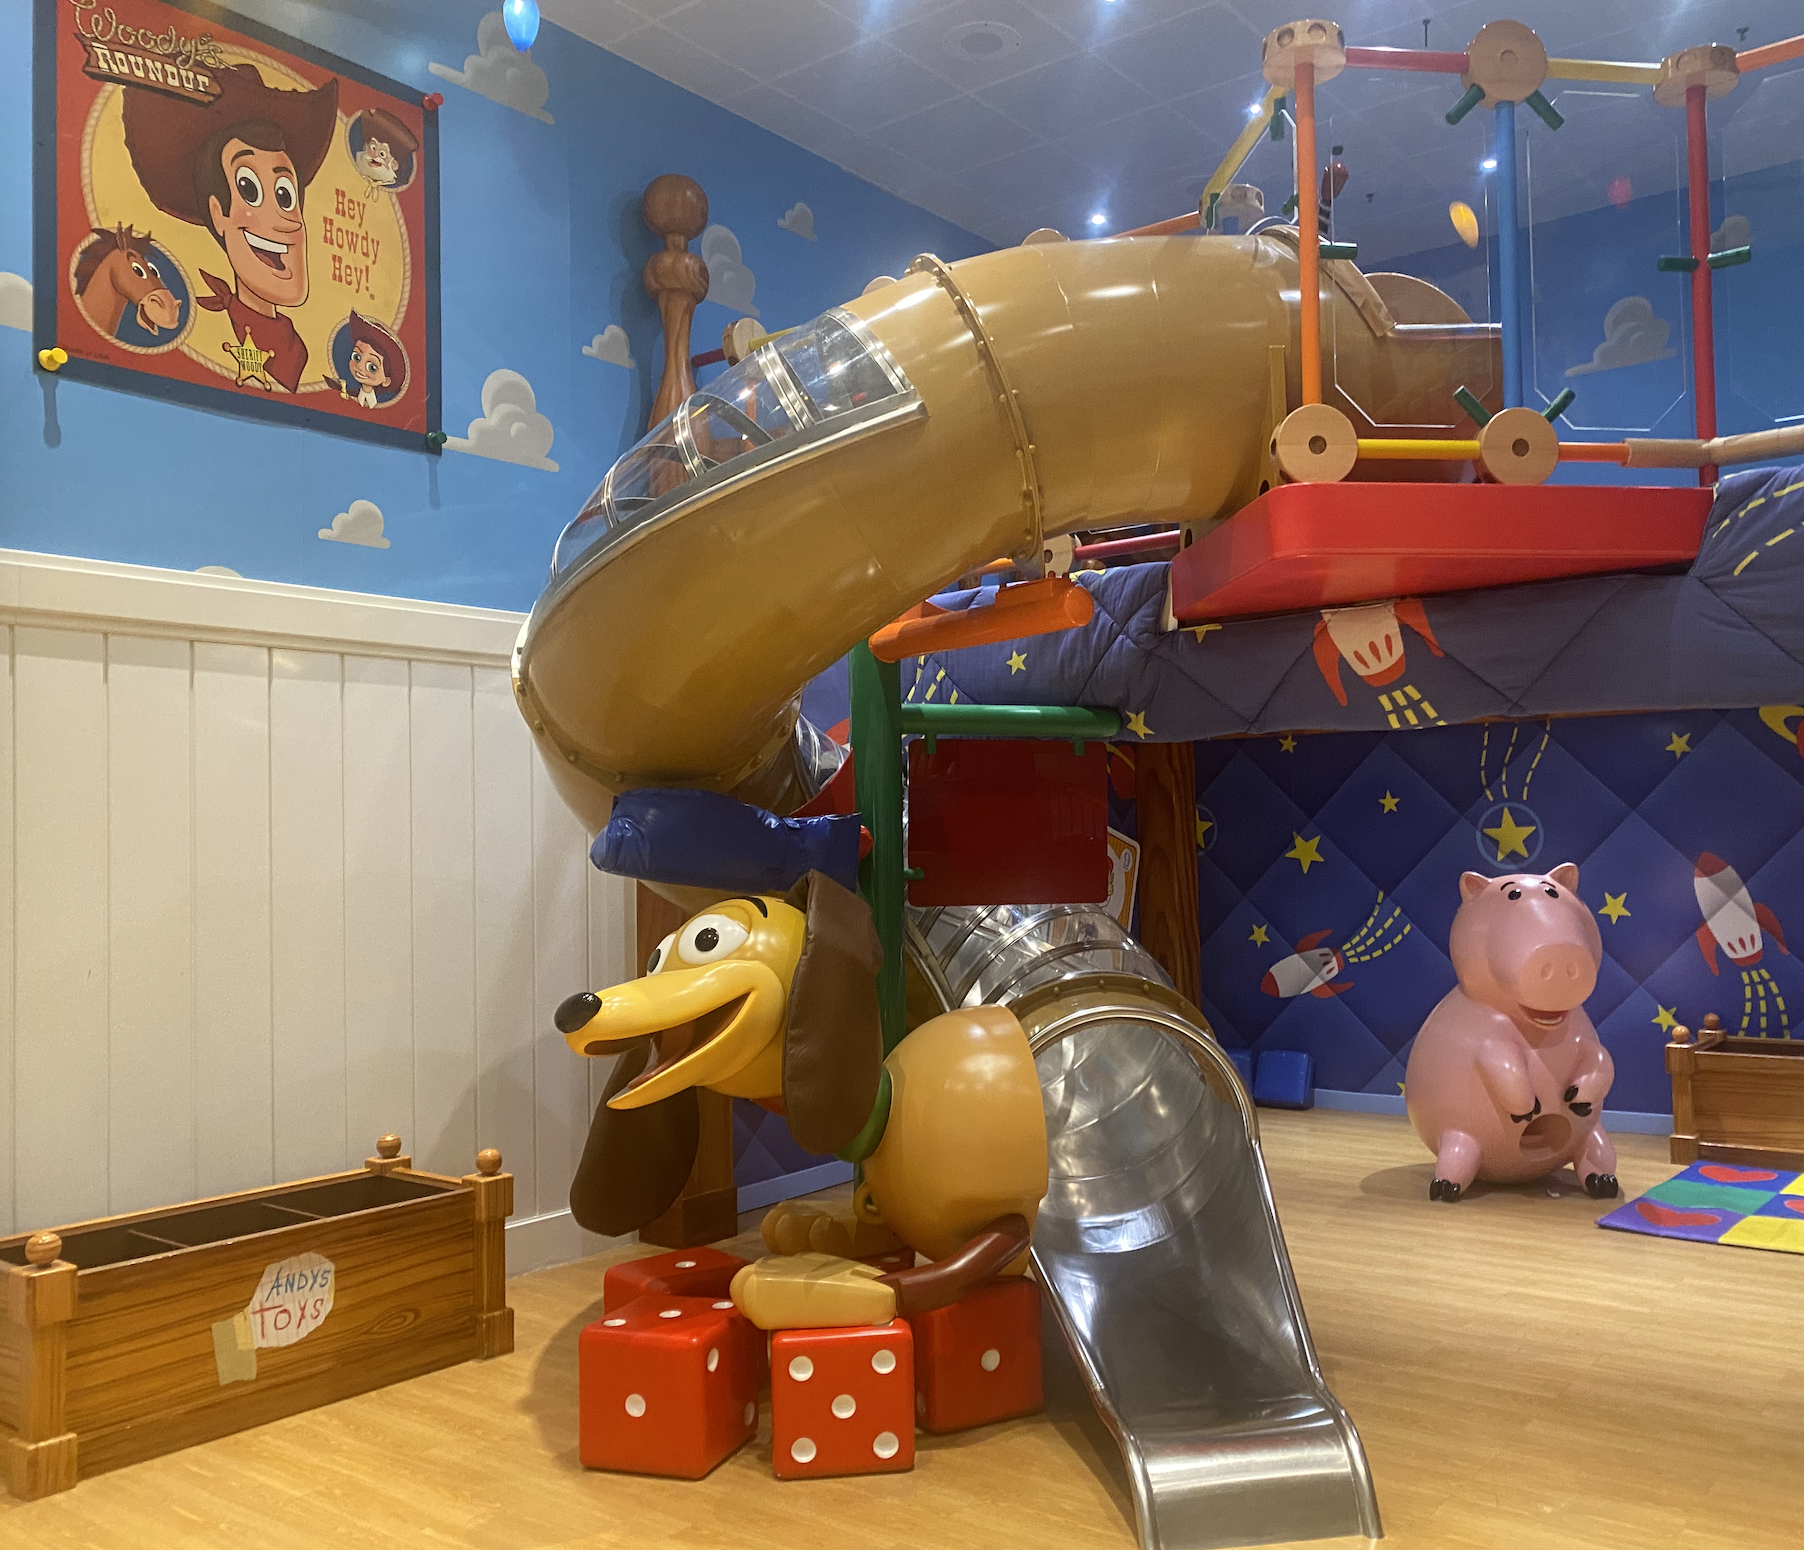 Children&#x27;s play area with Toy Story-themed decor, including Woody poster, tunnel slide, Slinky Dog slide, and Hamm piggy bank figure